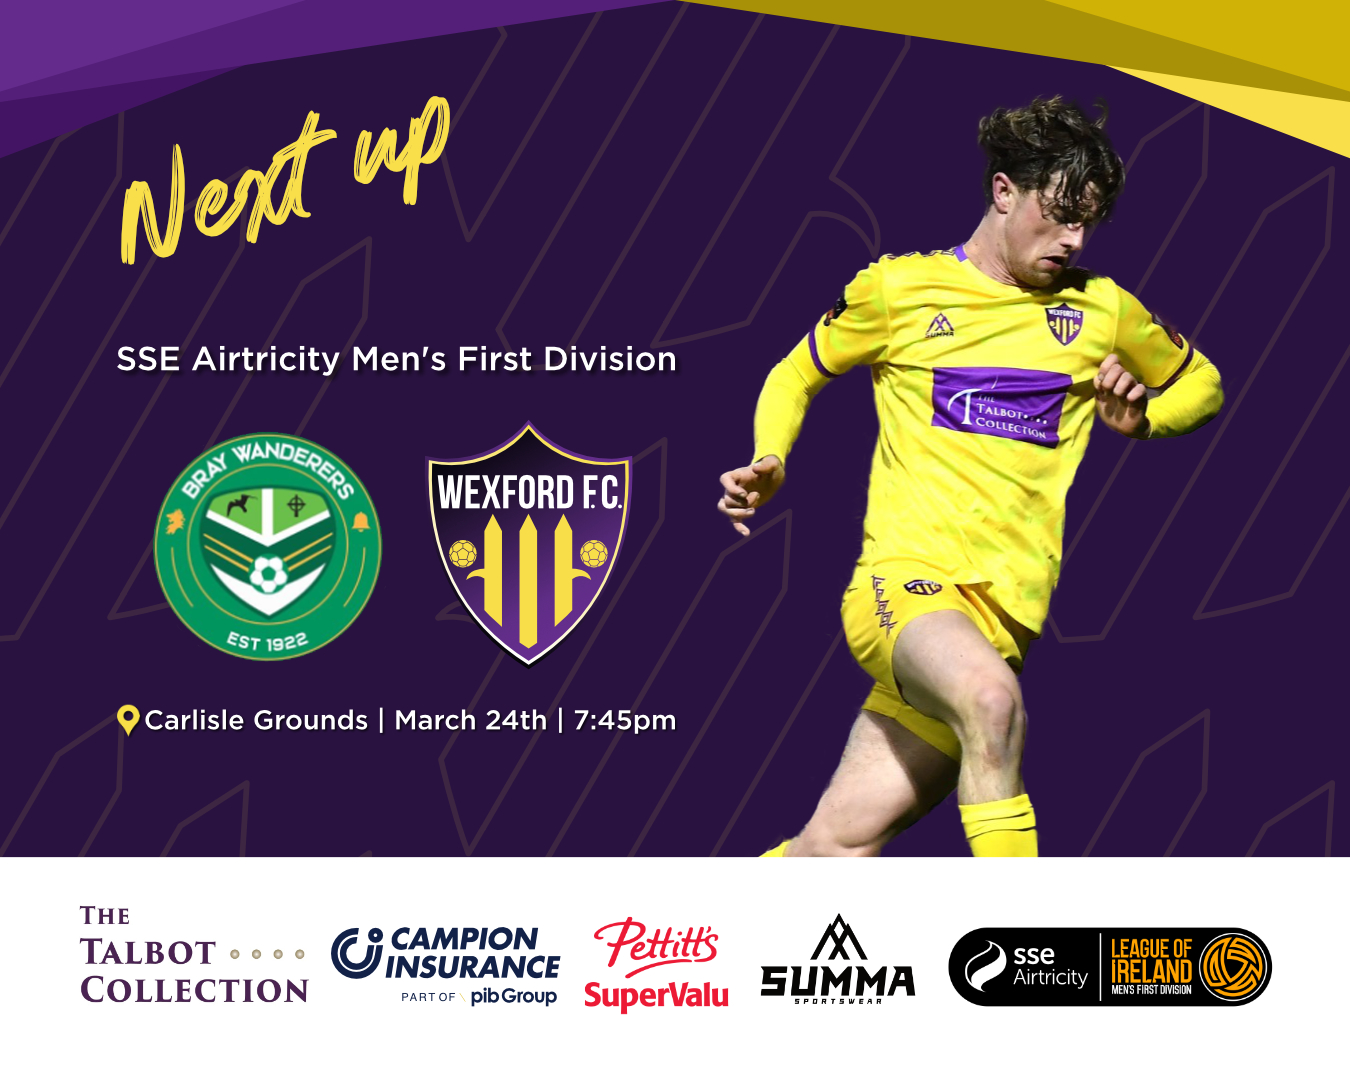 Match Preview: Bray Wanderers vs Wexford FC